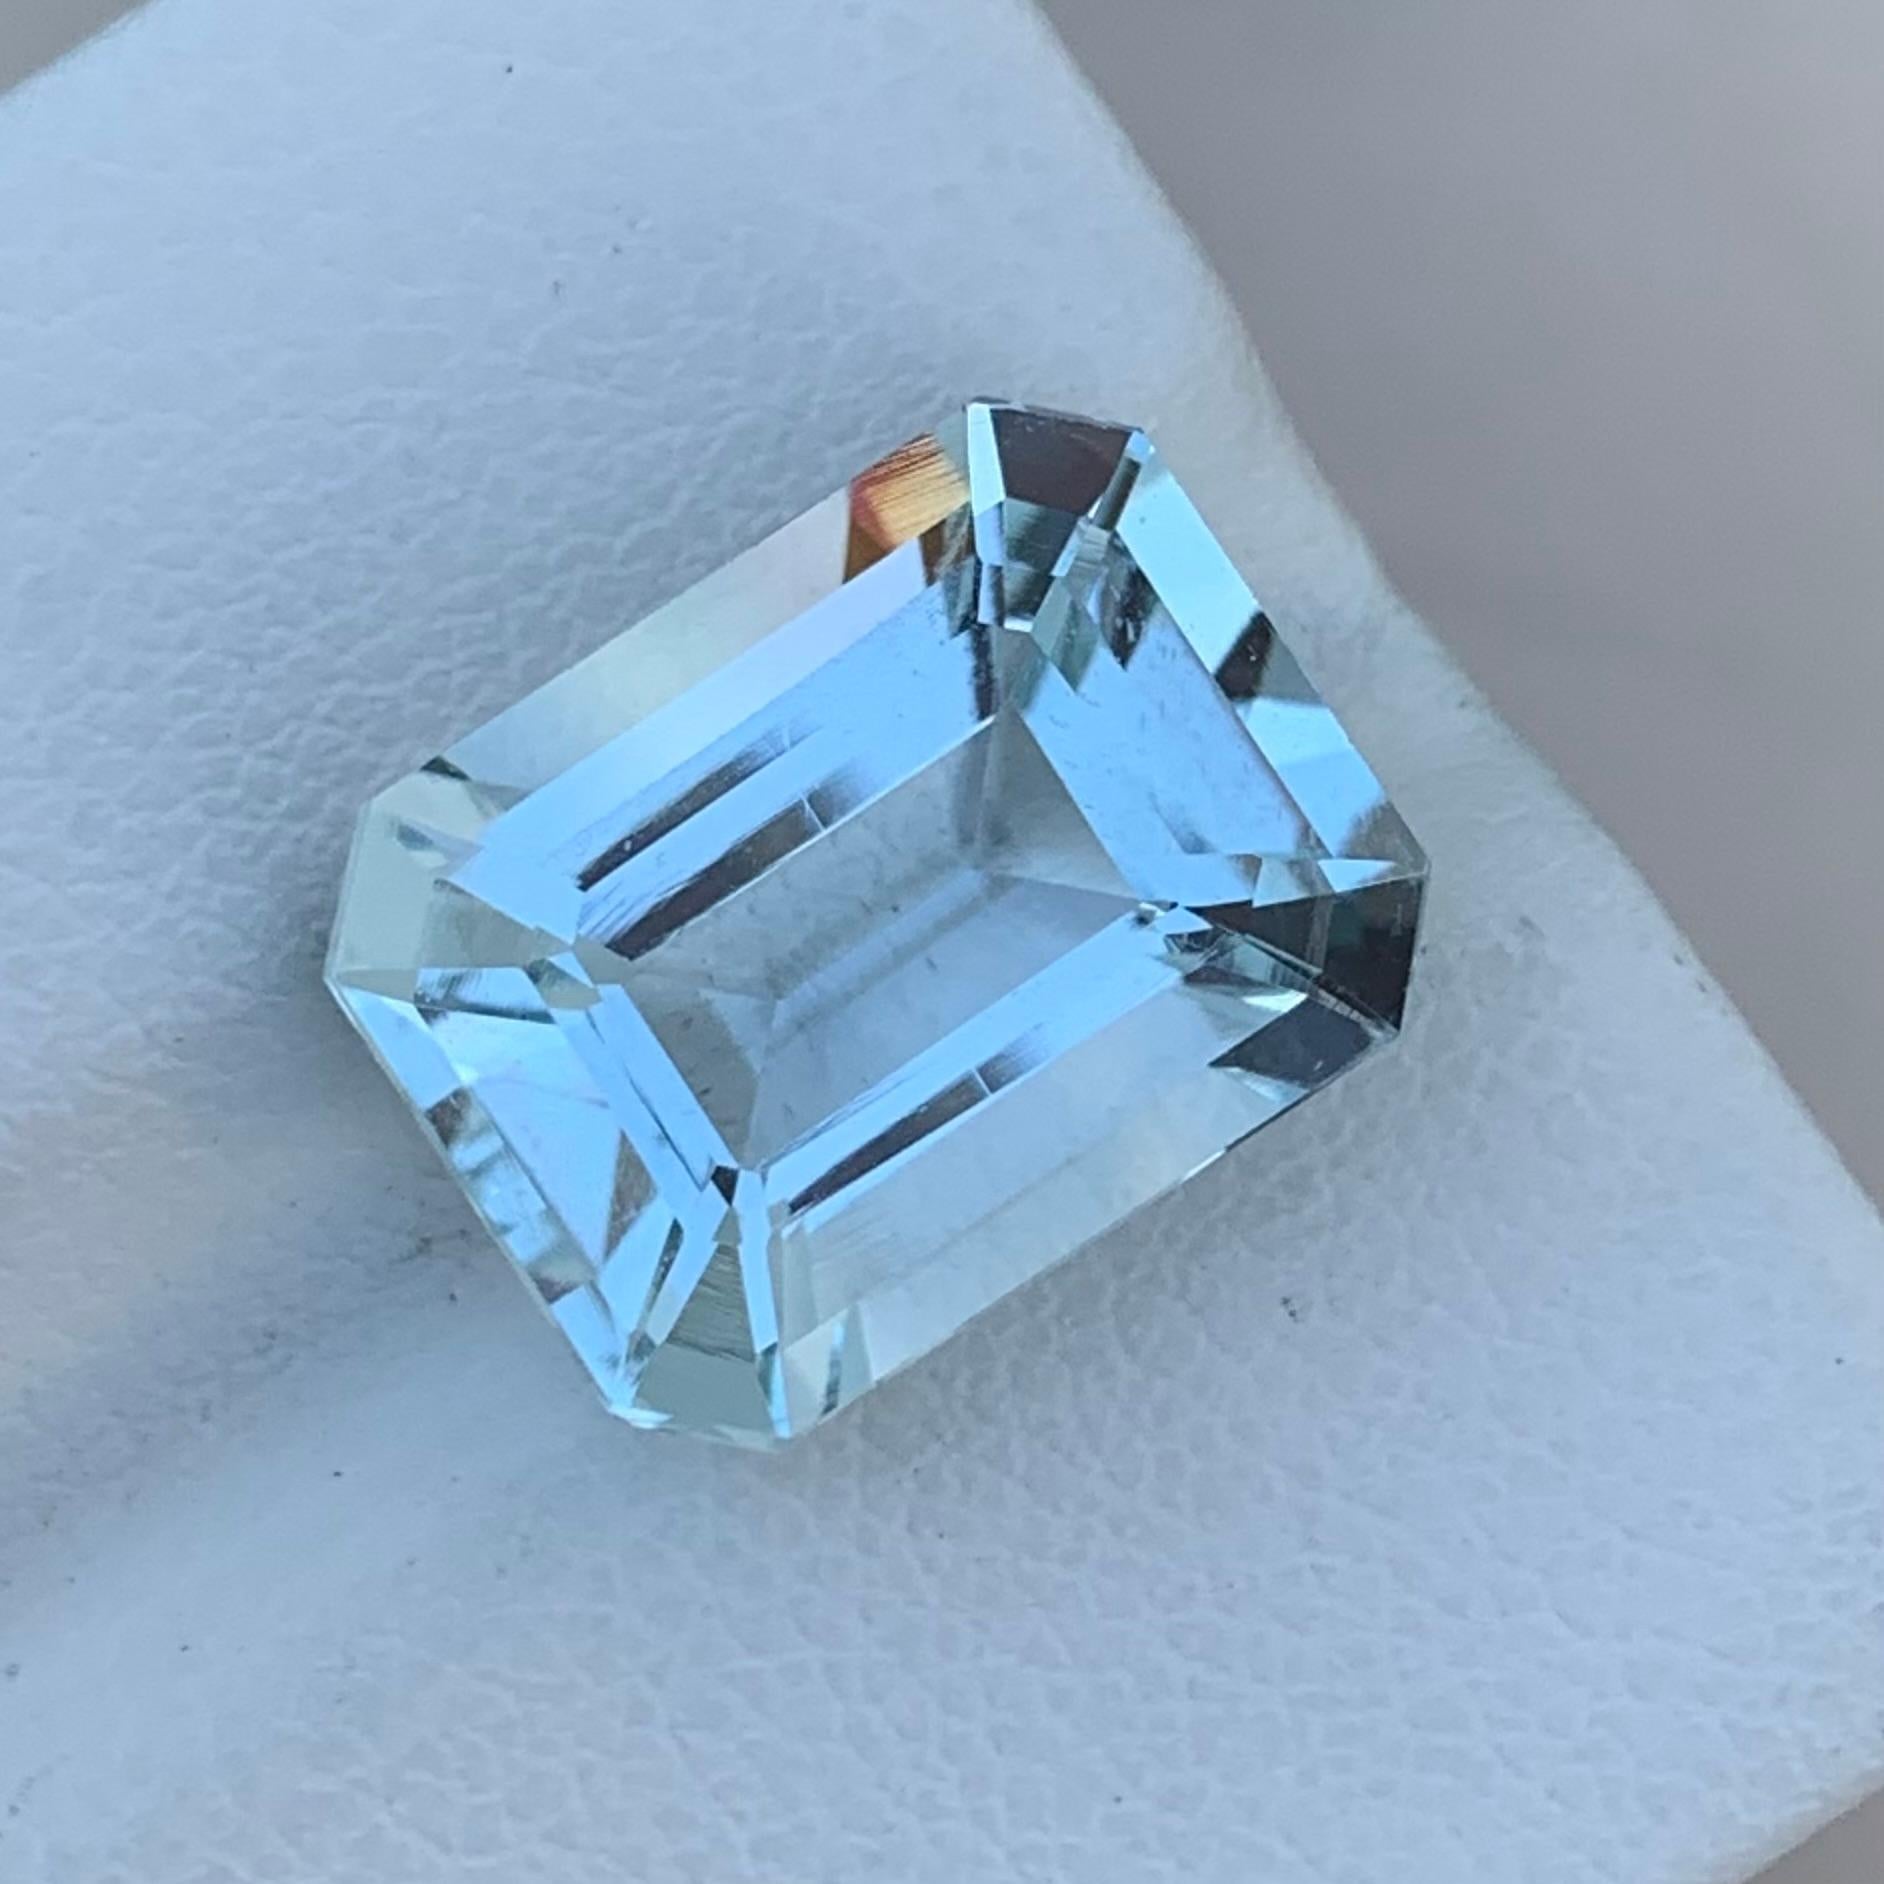 Loose Aquamarine
Weight: 7.05 Carat
Dimension: 13.4 x 10.4 x 7.3 Mm
Colour : Blue and white
Origin: Shigar Valley, Pakistan
Treatment: Non
Certificate : On Demand
Shape: Emerald 

Aquamarine is a captivating gemstone known for its enchanting